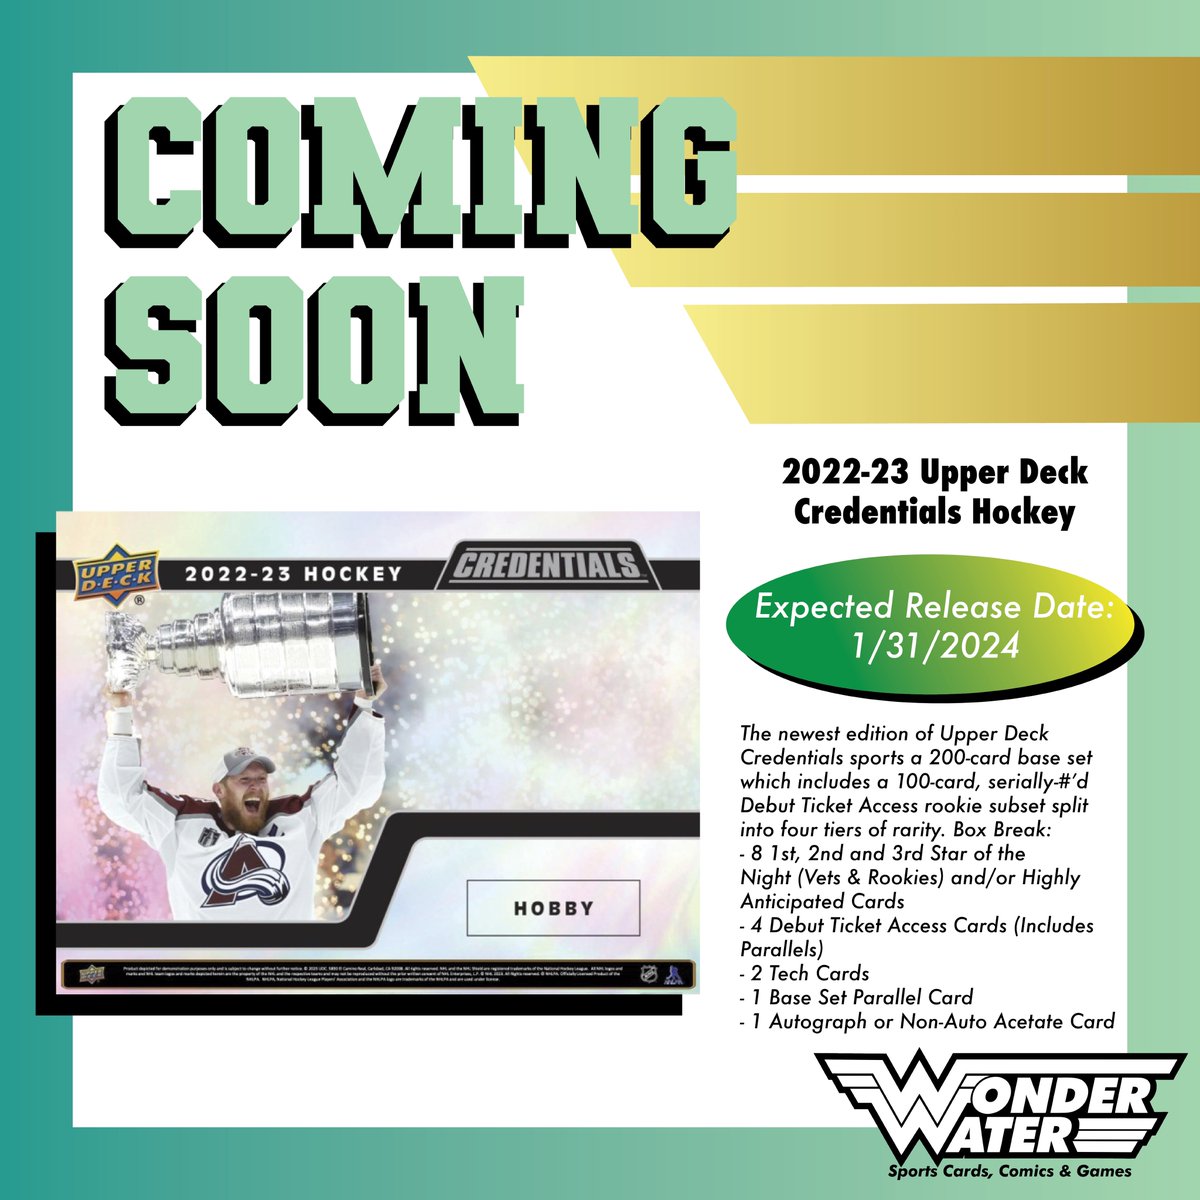 Check out our expected releases for this week!

2023 Panini Immaculate BKB
2023 Upper Deck Credentials HKY
2023 Topps Diamond Icons BB
2023 Panini Prime Racing
2023 Upper Deck Marvel Moon Knight

#sportscards #basketballcards #hockeycards #baseballcards #racingcards #marvelcards